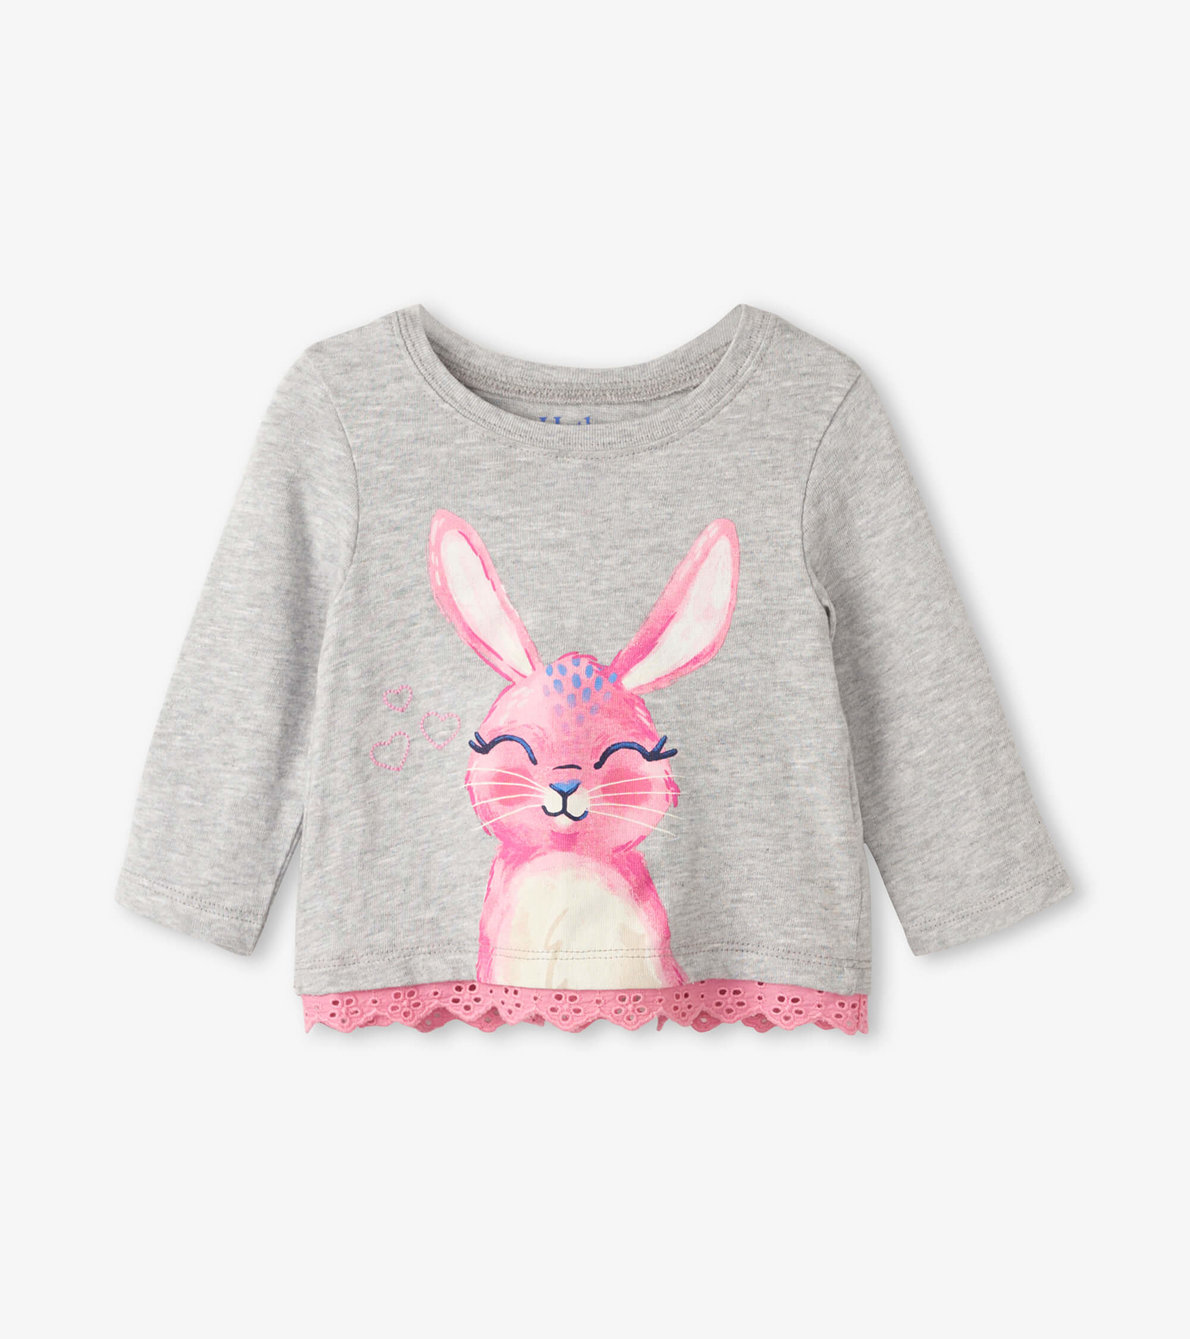 View larger image of Cute Bunny Long Sleeve Baby Tee